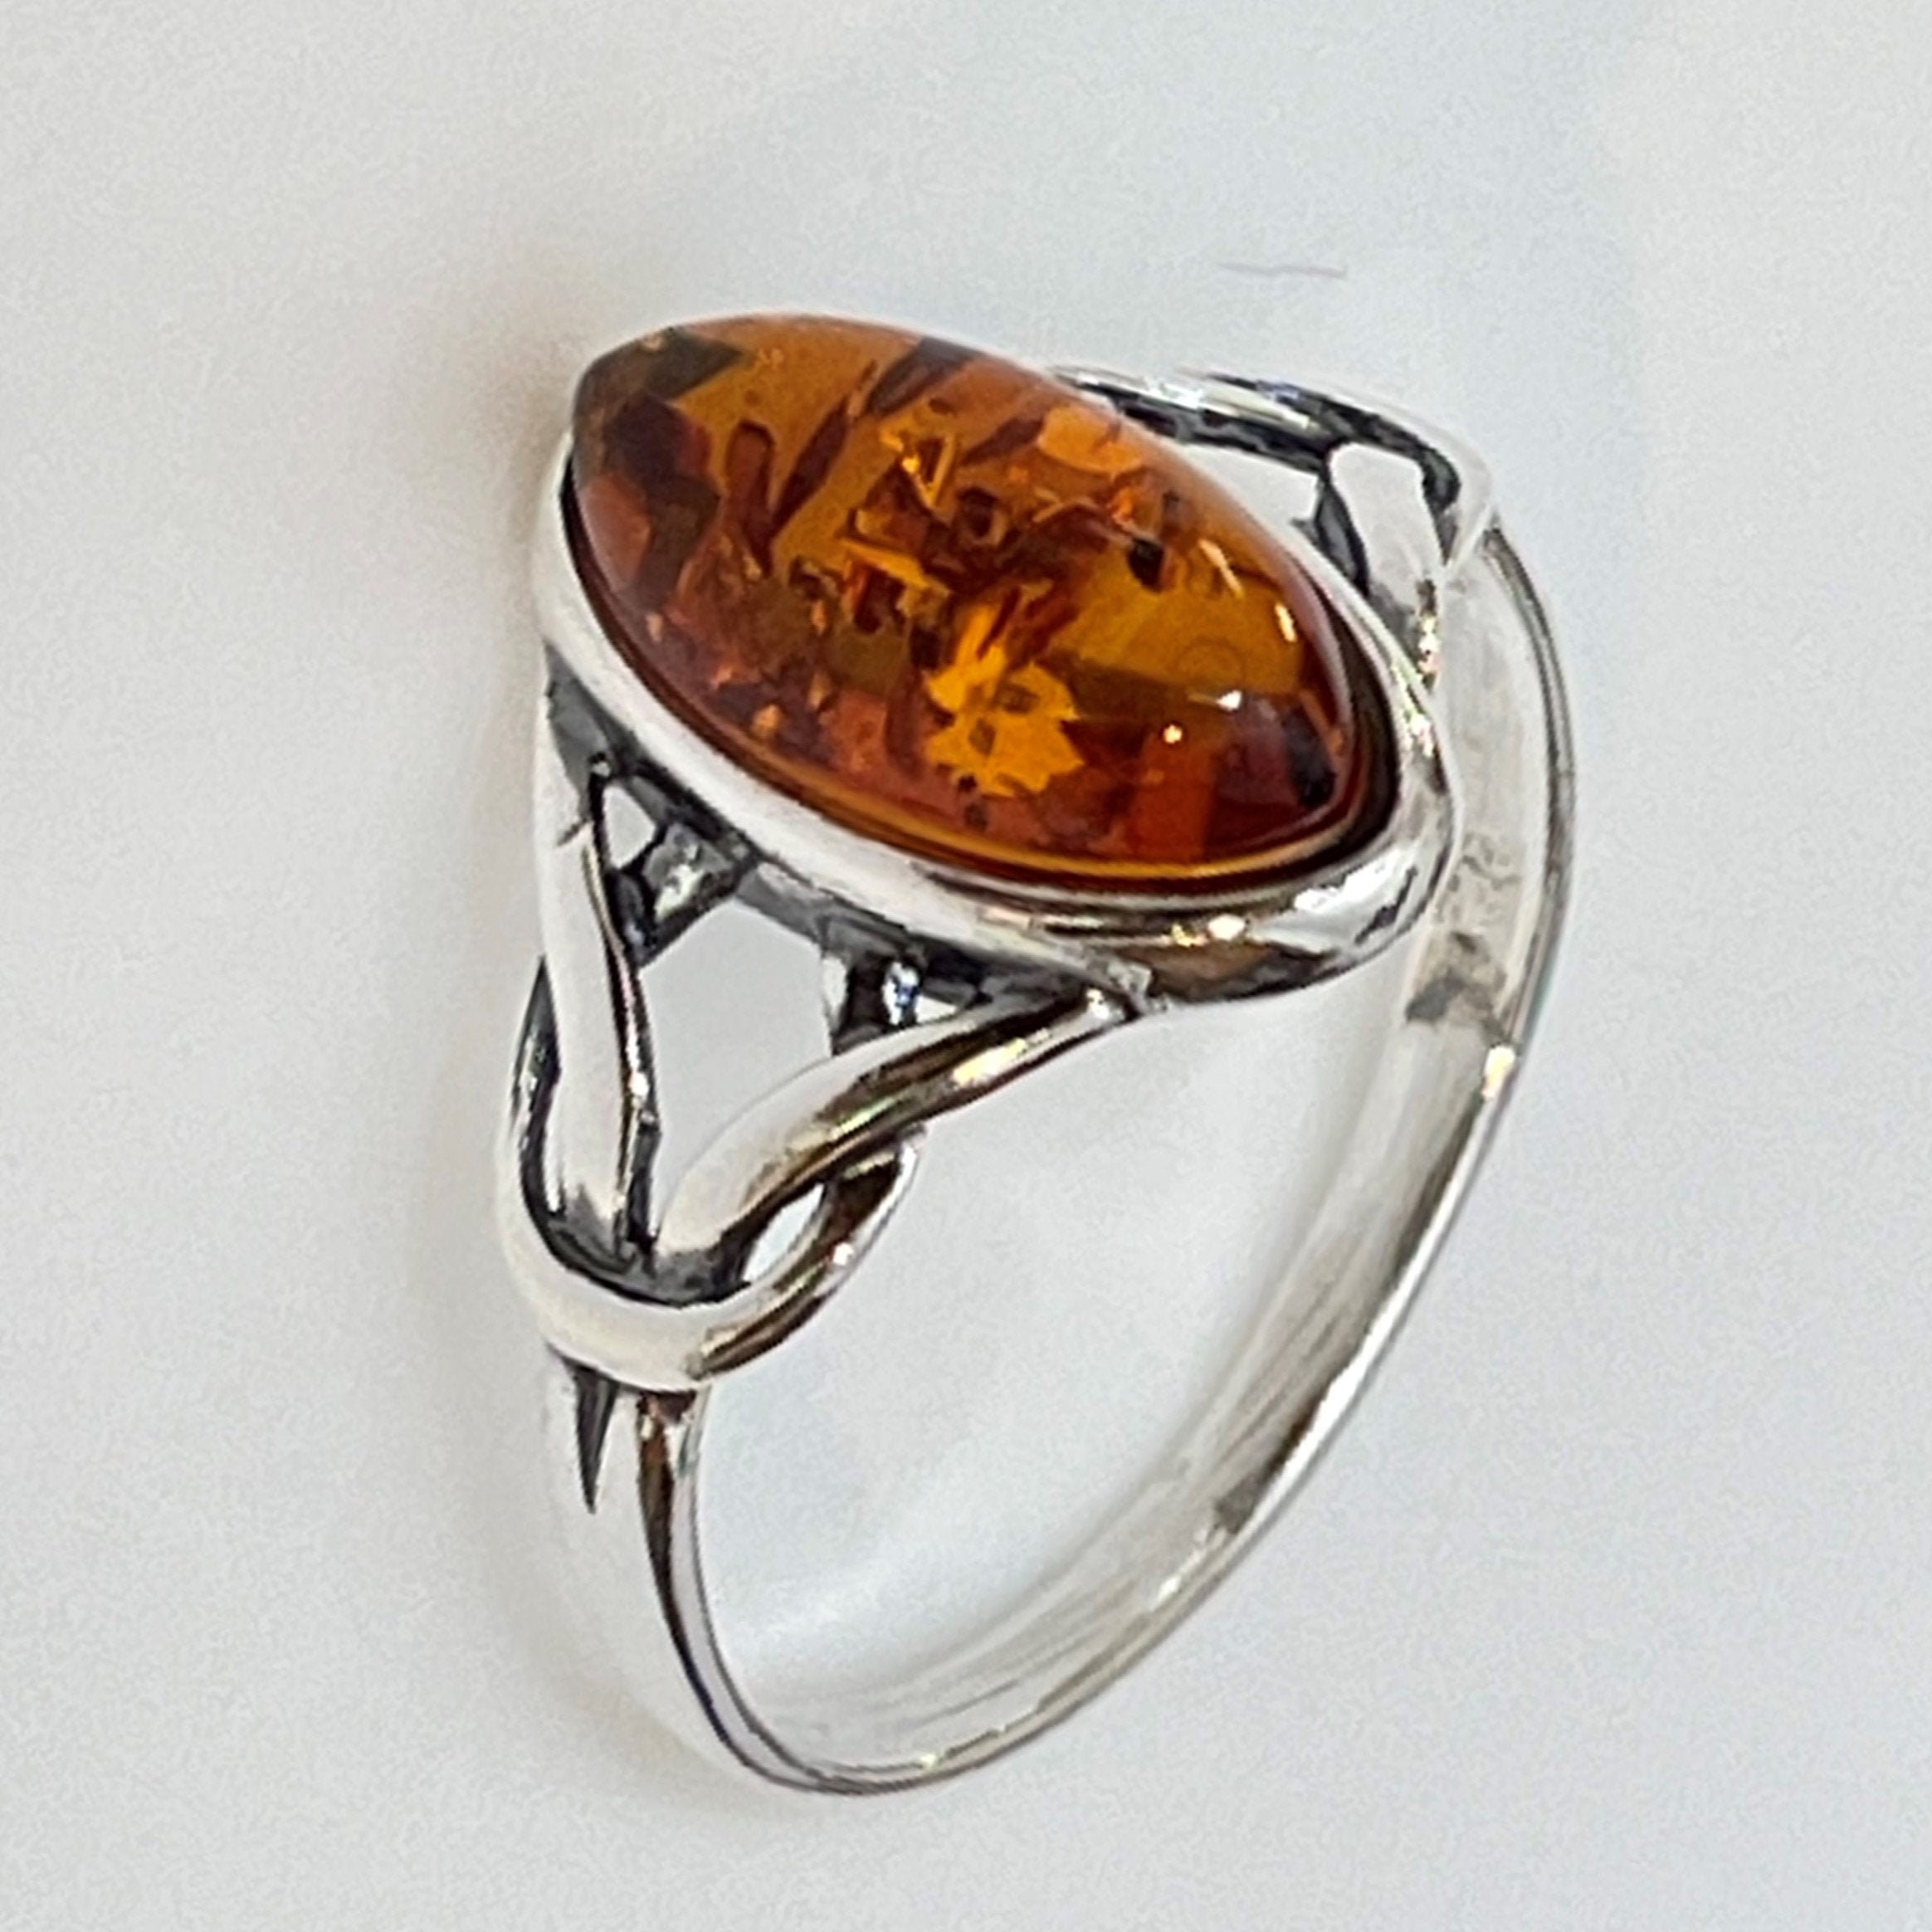 Vintage 925 Sterling Silver Amber Gift for Her Girl Mom Sister Daughter Ring Gilding Silver with Genuine Natural Baltic Amber Handmade